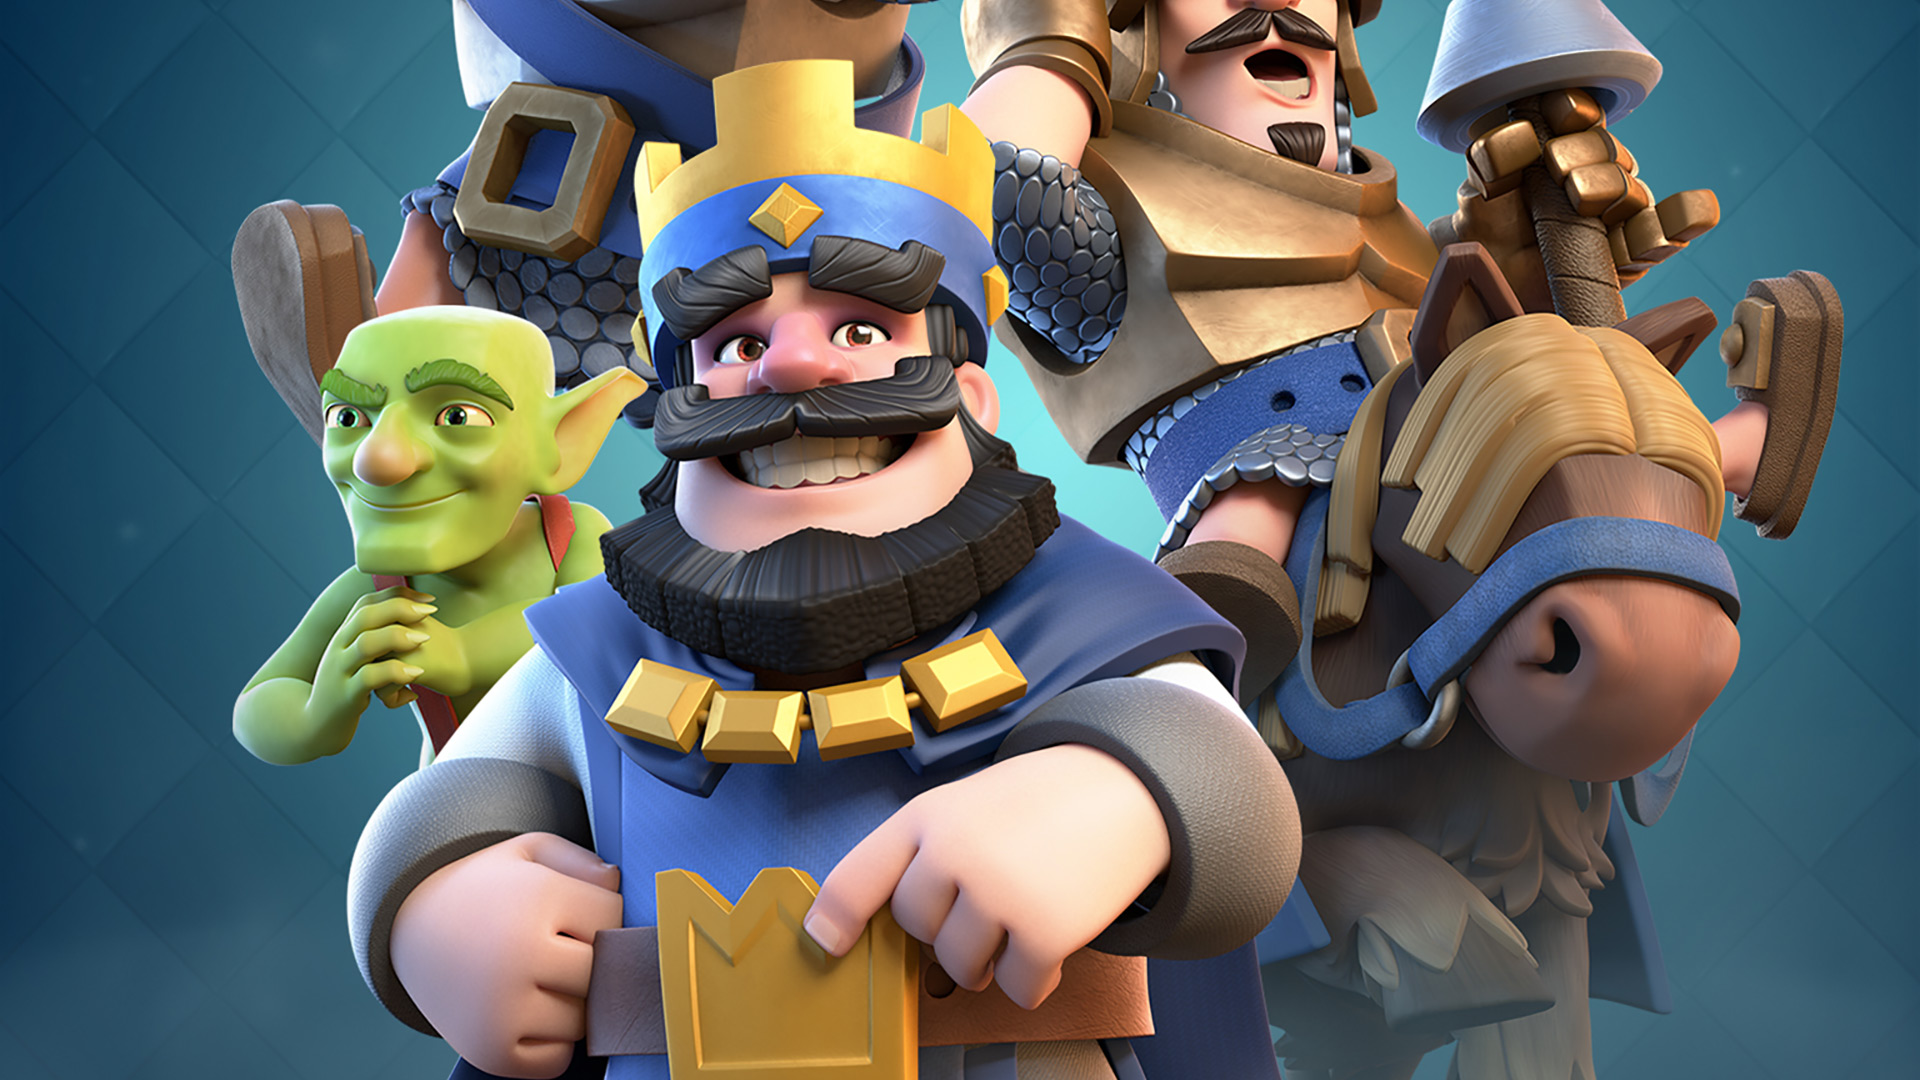 Top 10 YouTube ads in August: Clash Royale breaks record with 5 ads in top 10